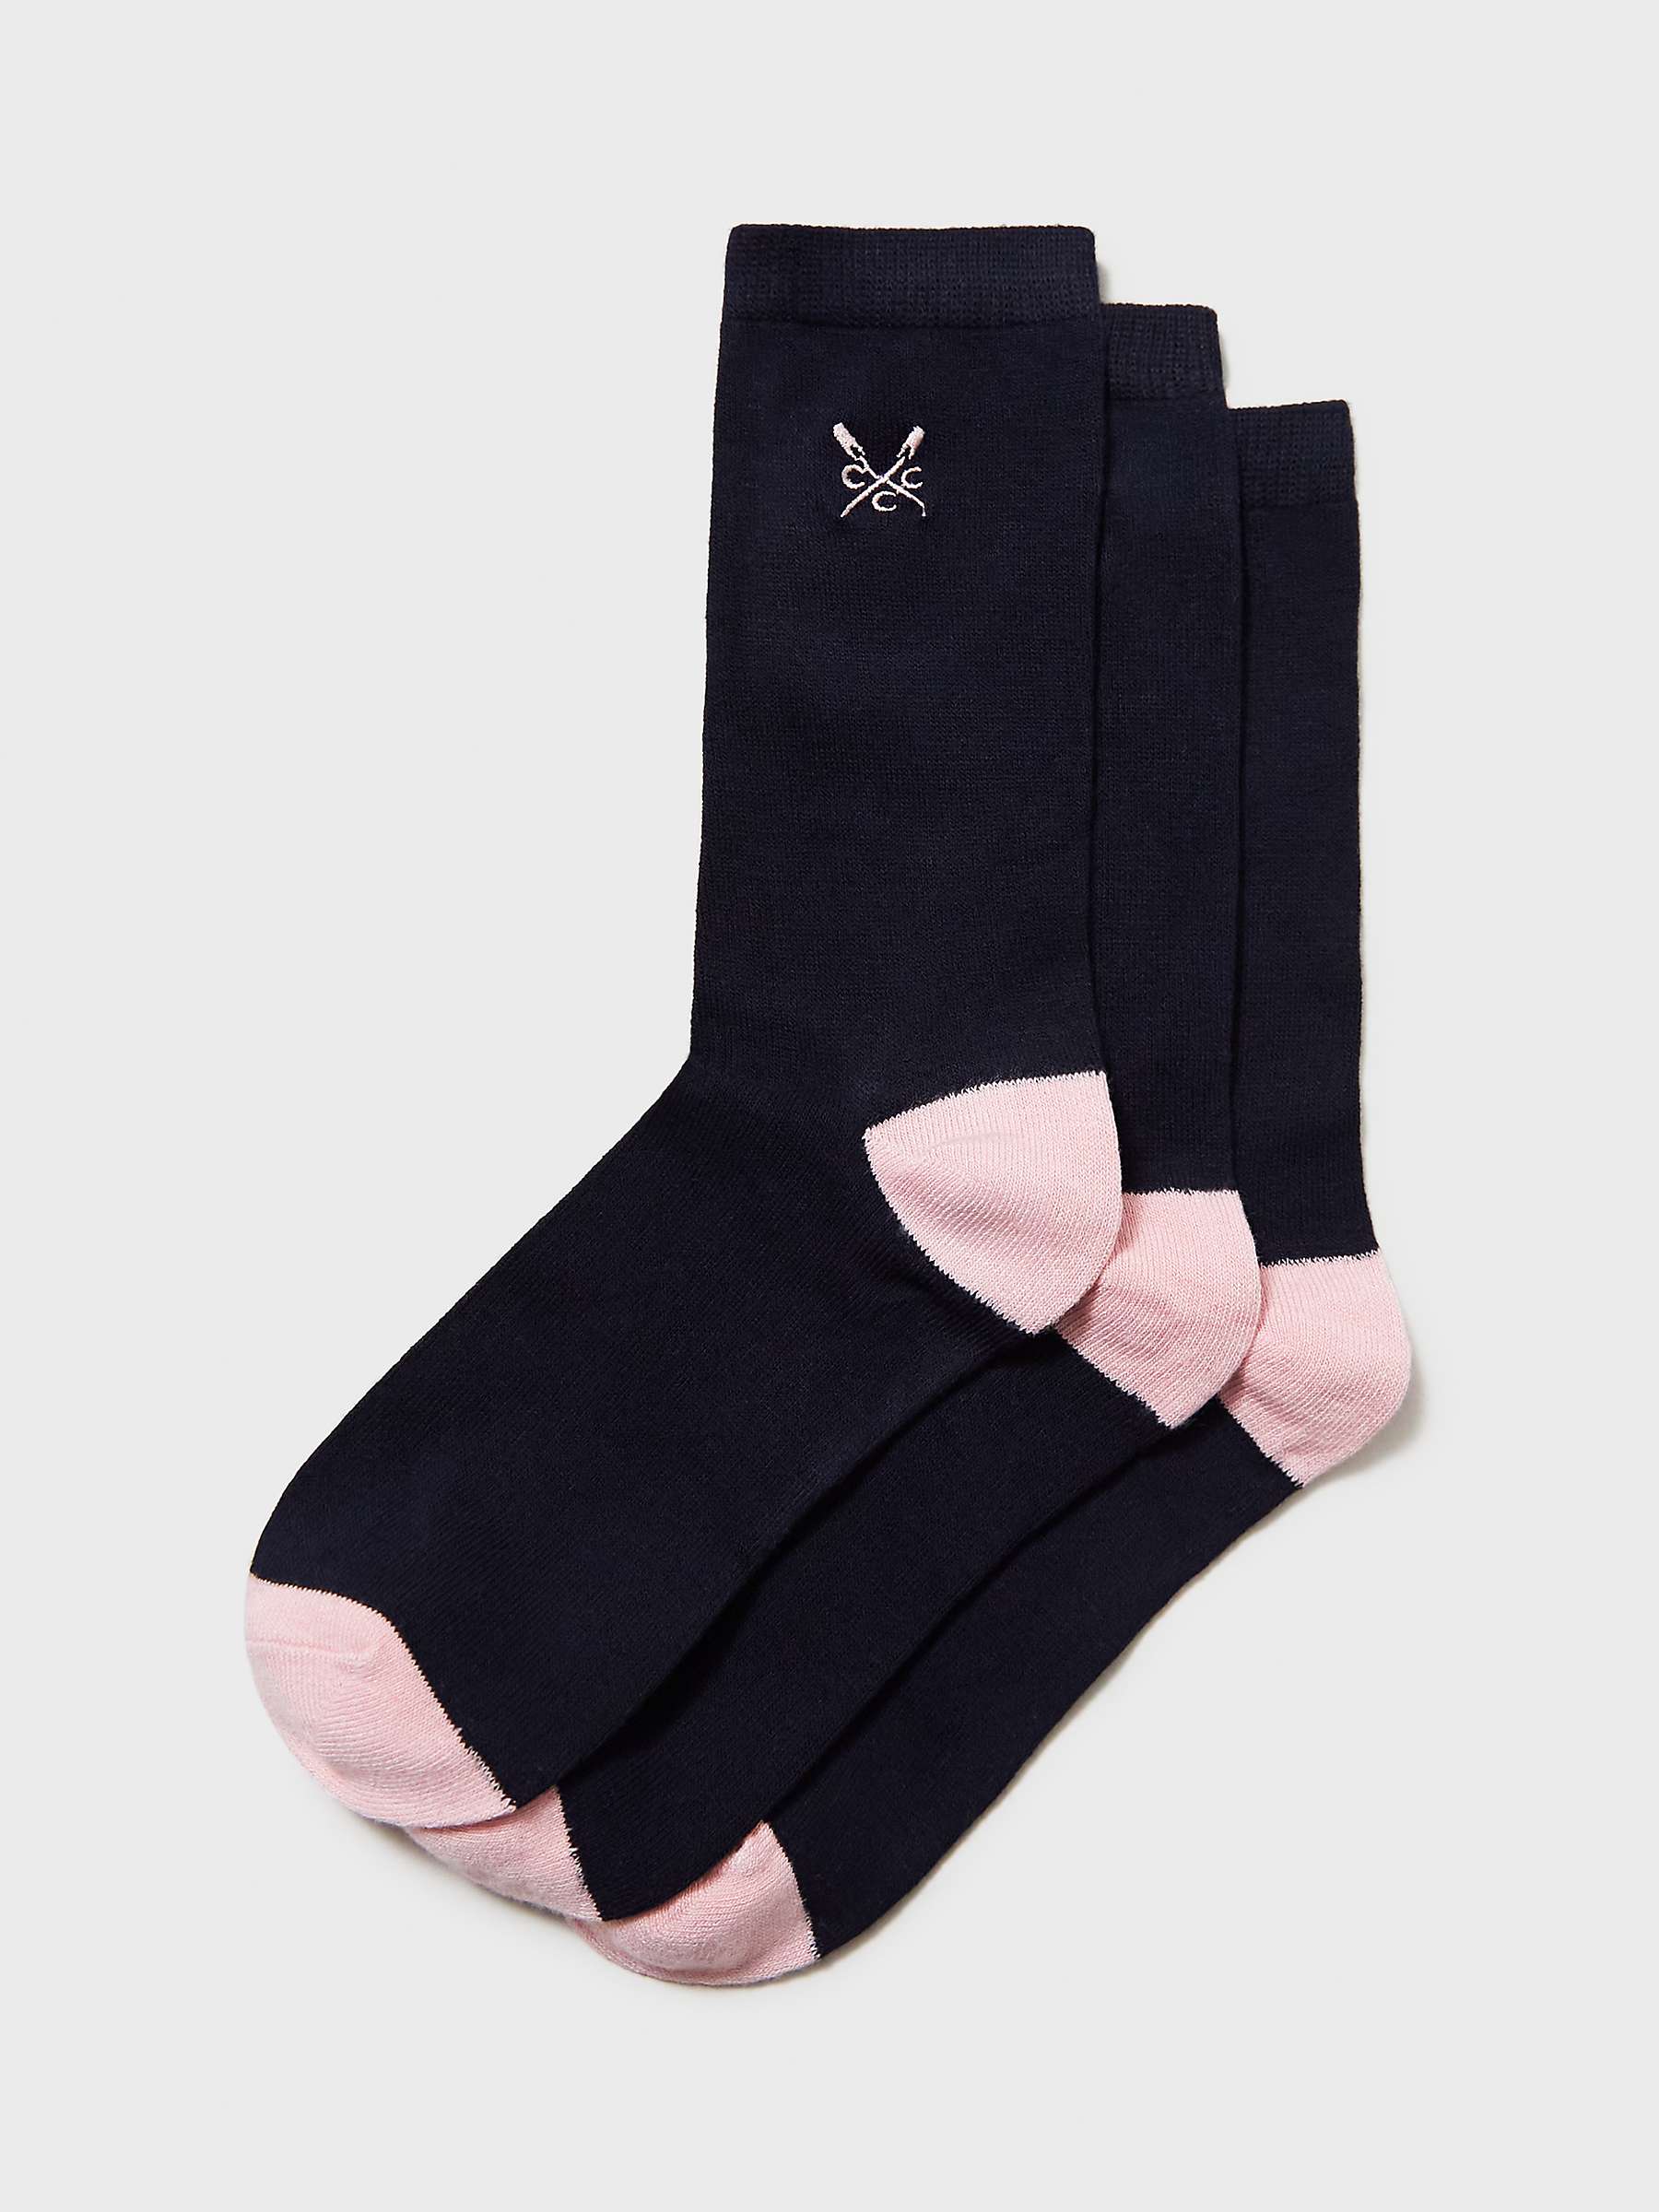 Buy Crew Clothing Embroidered Logo Bamboo Blend Ankle Socks, Pack of 3, Navy Blue, One Size Online at johnlewis.com